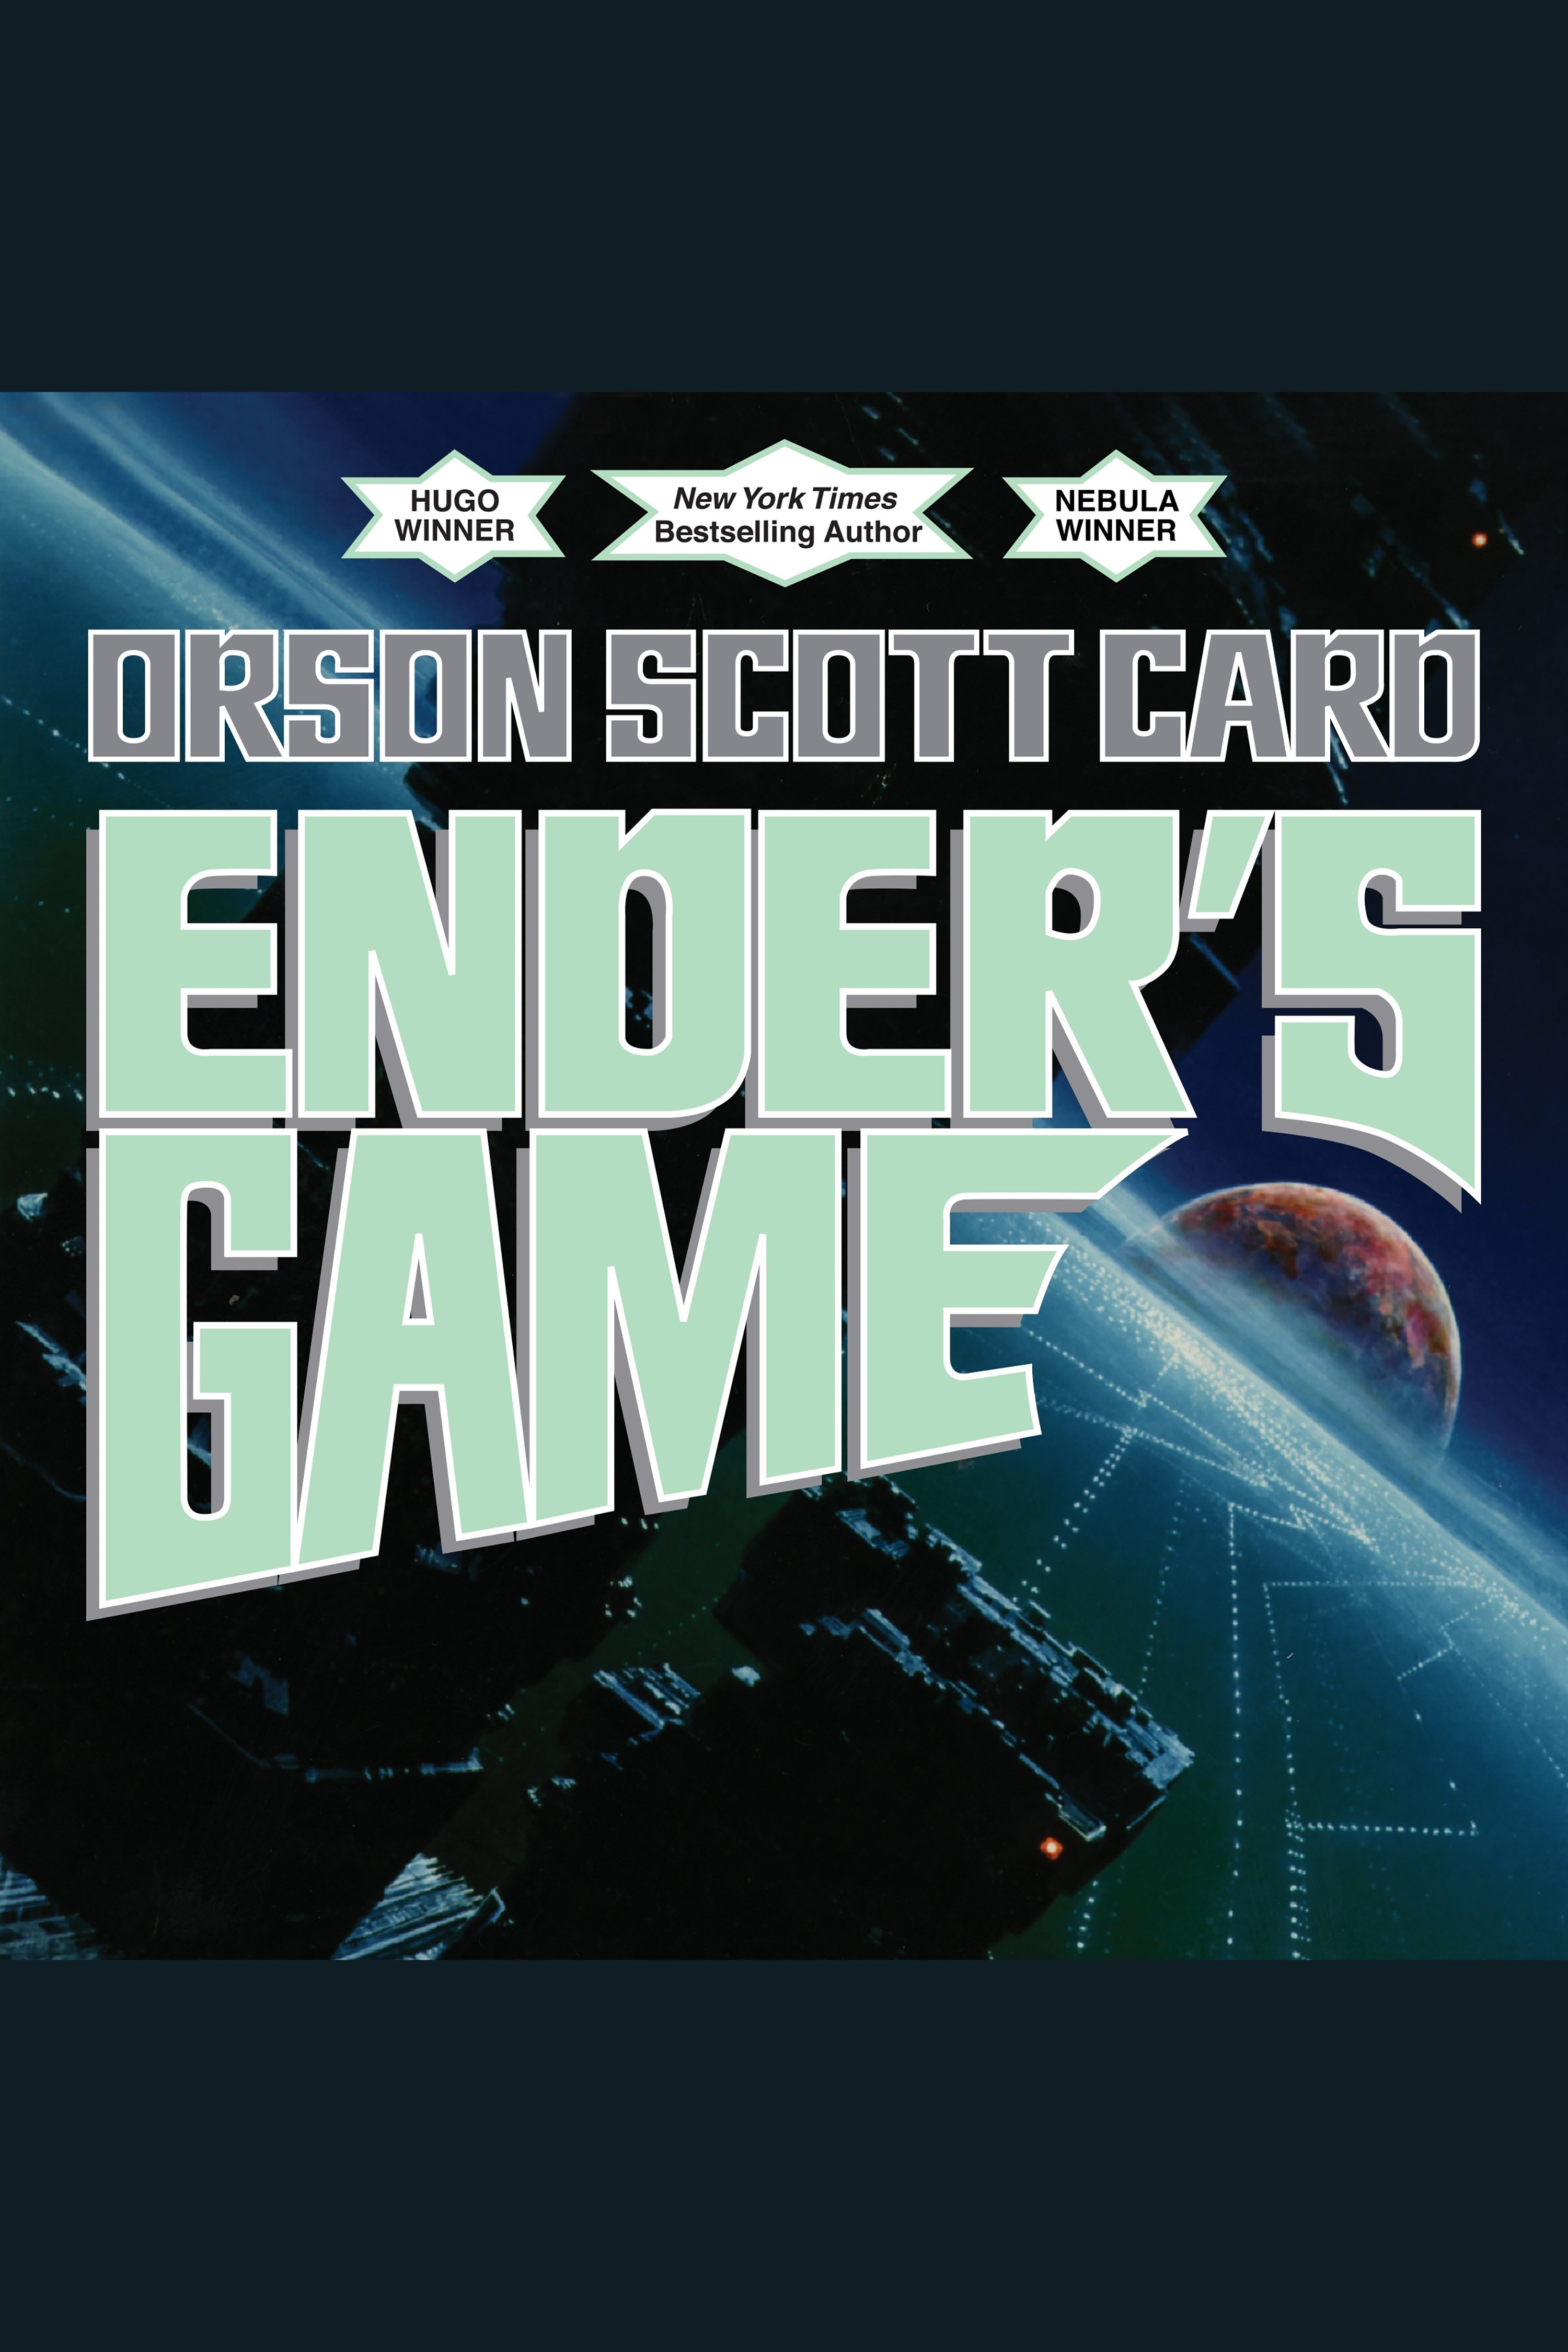 Ender's game cover image